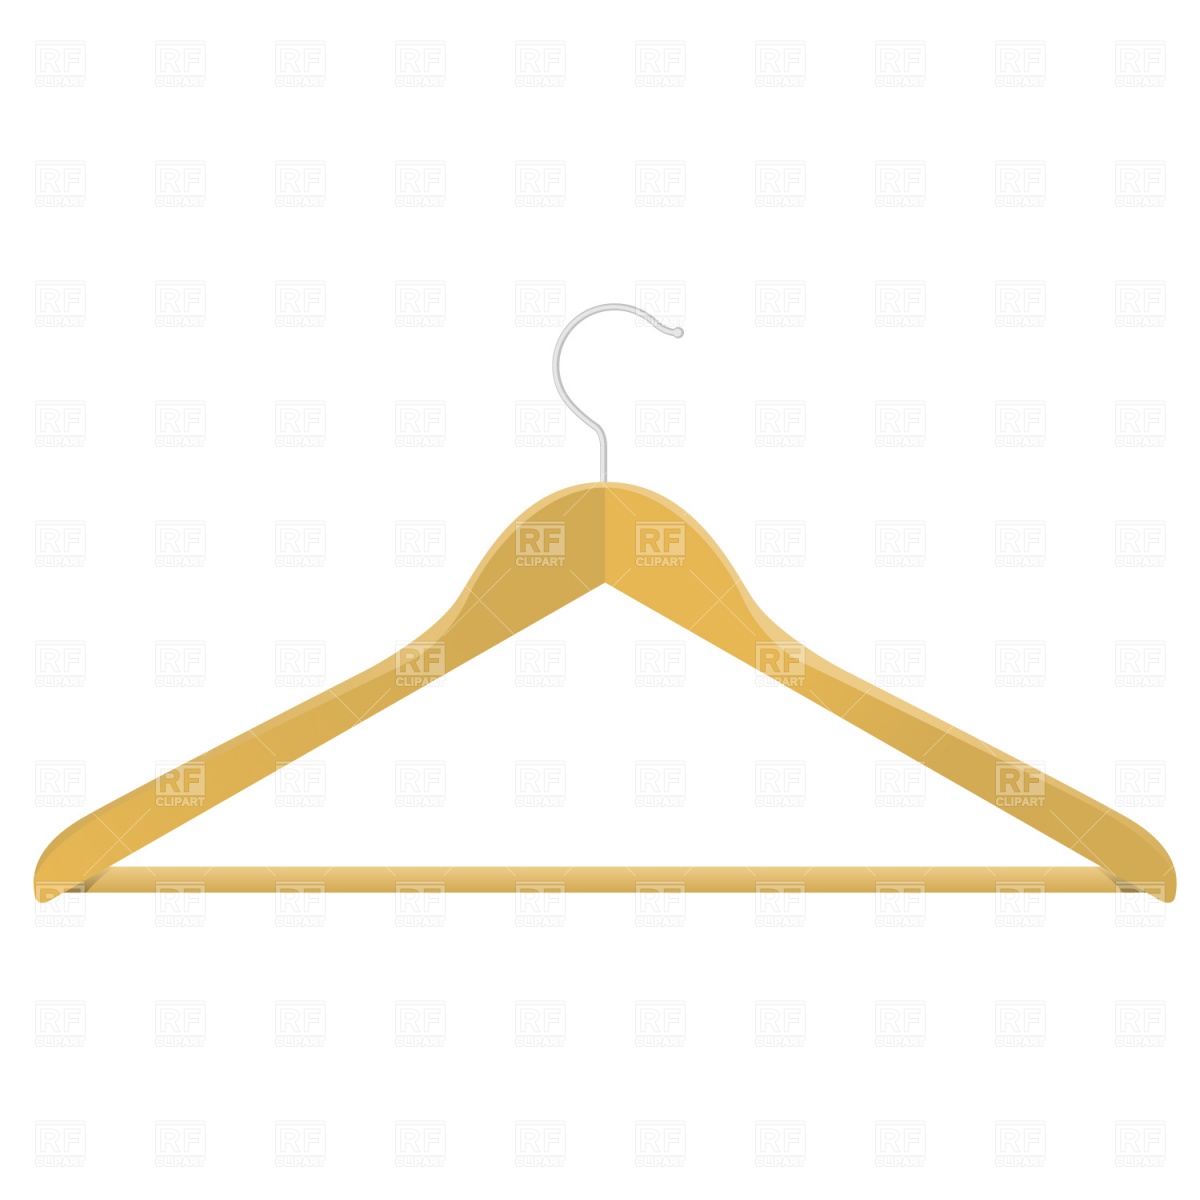 Shirt On Hanger Clipart   Clipart Panda   Free Clipart Images